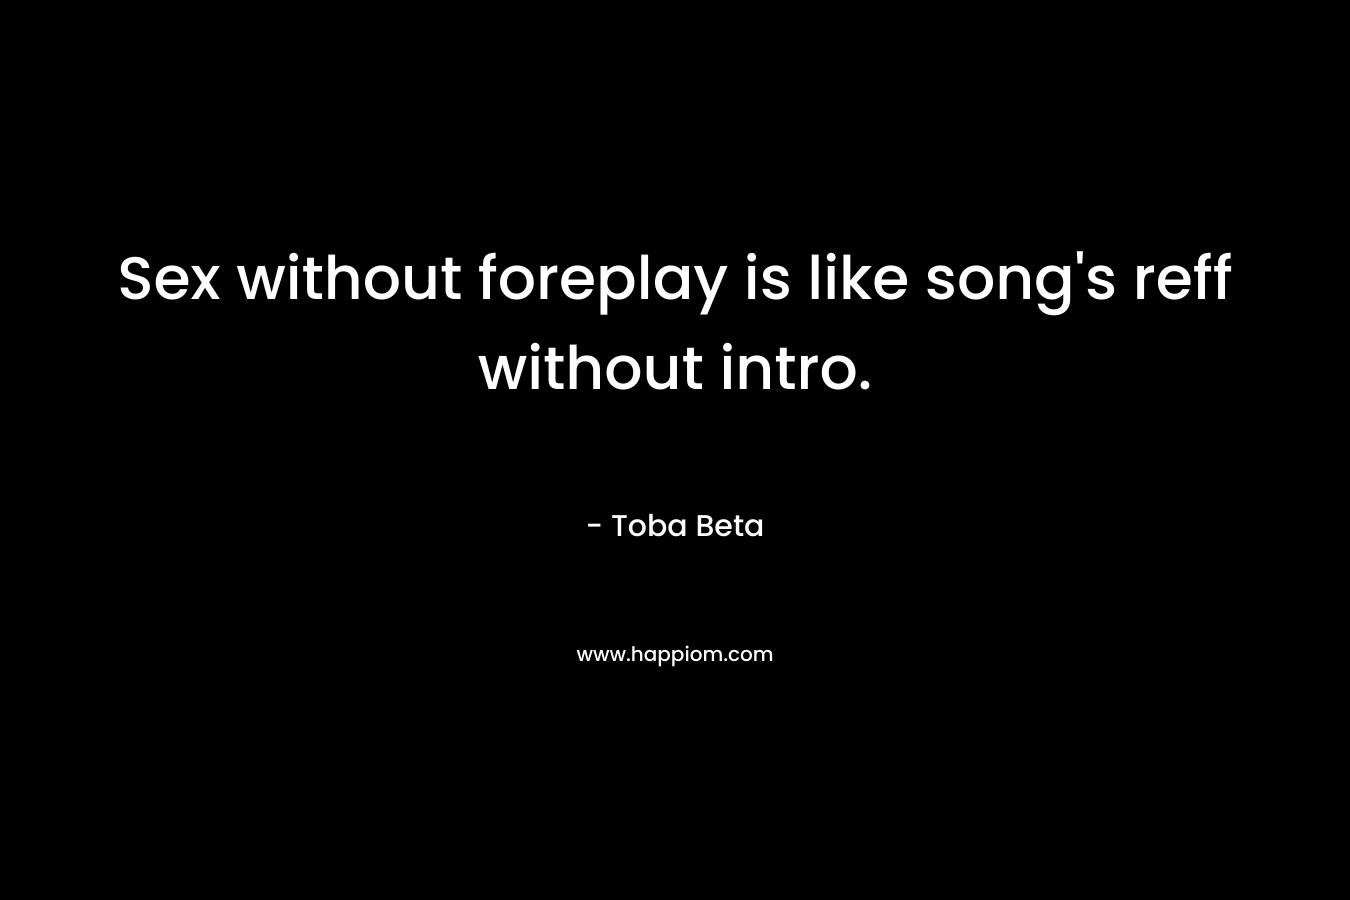 Sex without foreplay is like song’s reff without intro. – Toba Beta